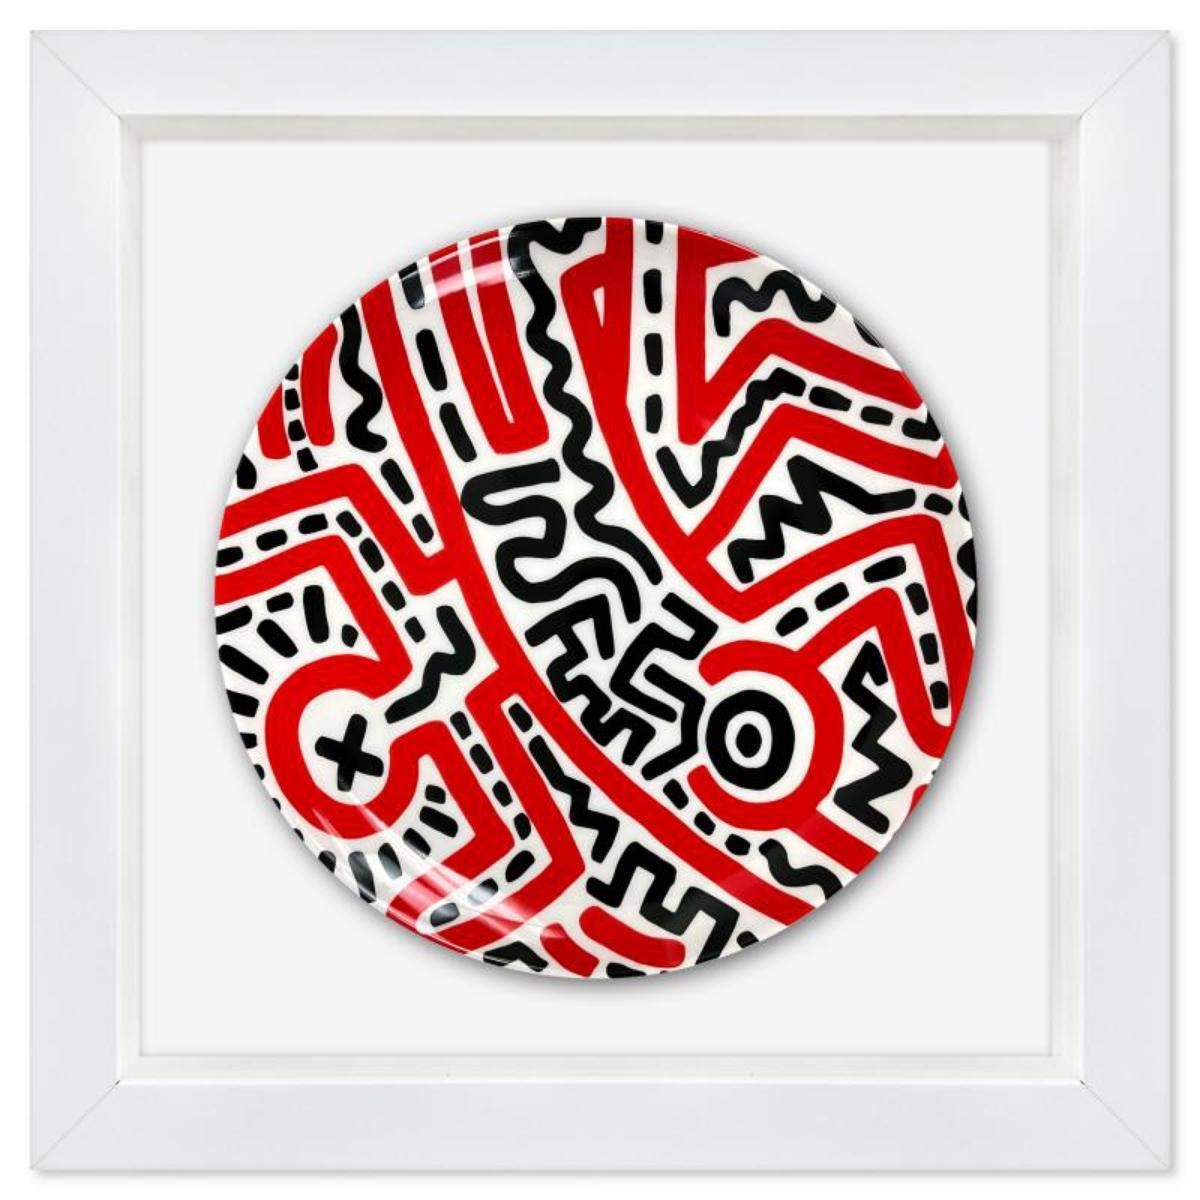 Keith Haring (1958-1990), Framed Limited Edition P